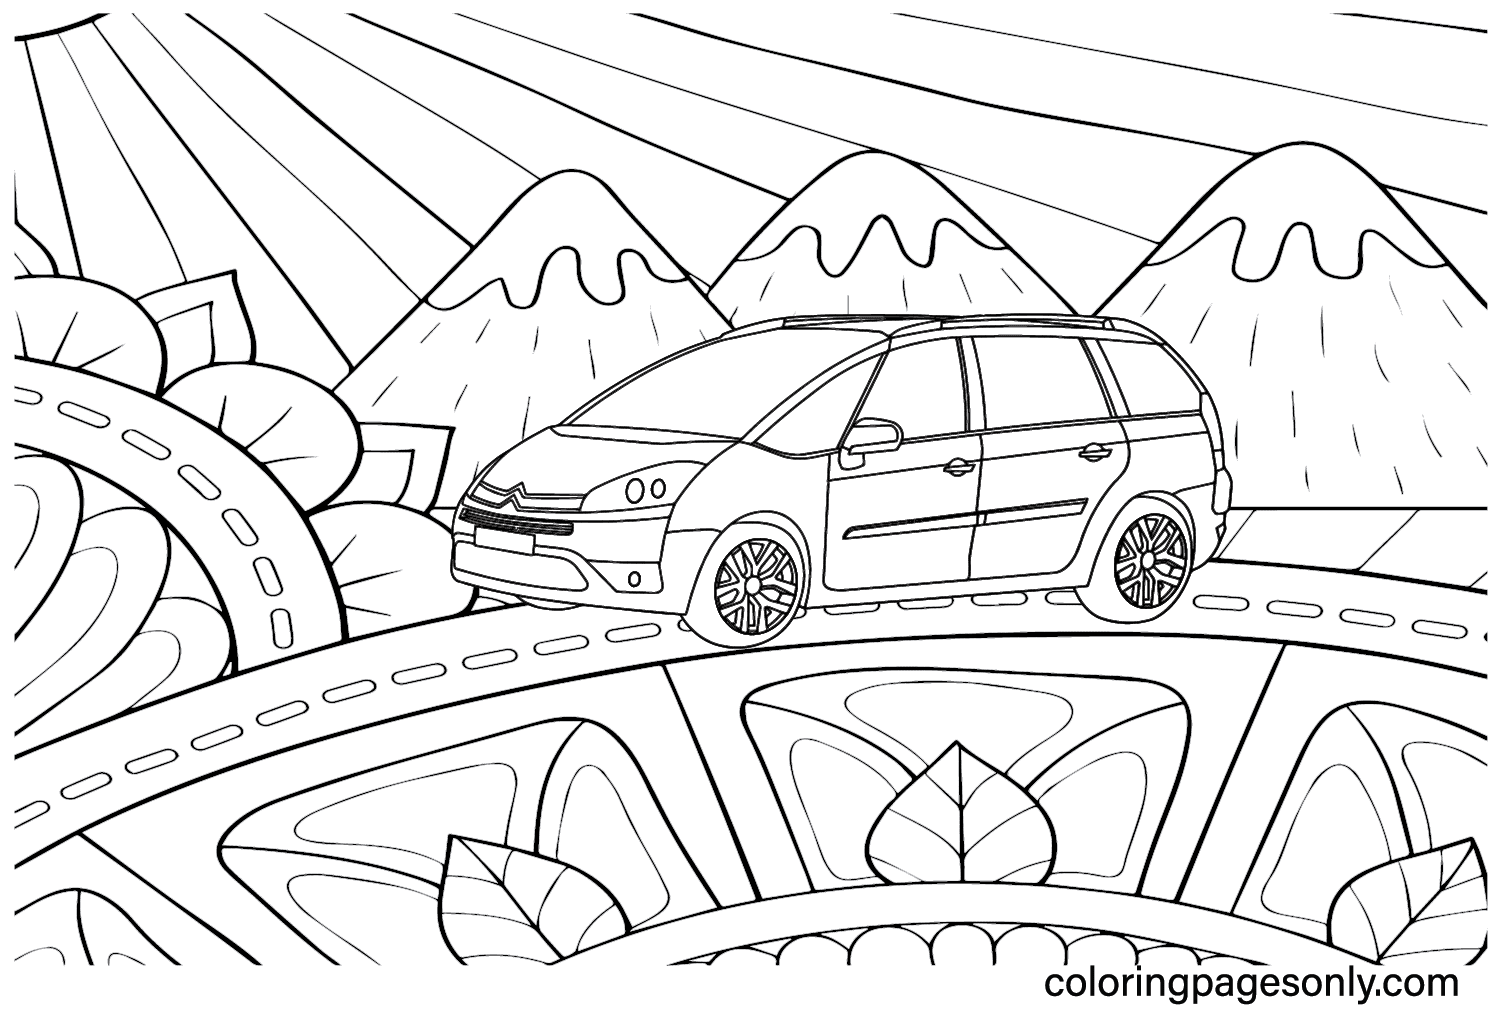 Citroen C4 Xara Picasso Coloring Page - Free Printable Coloring Pages